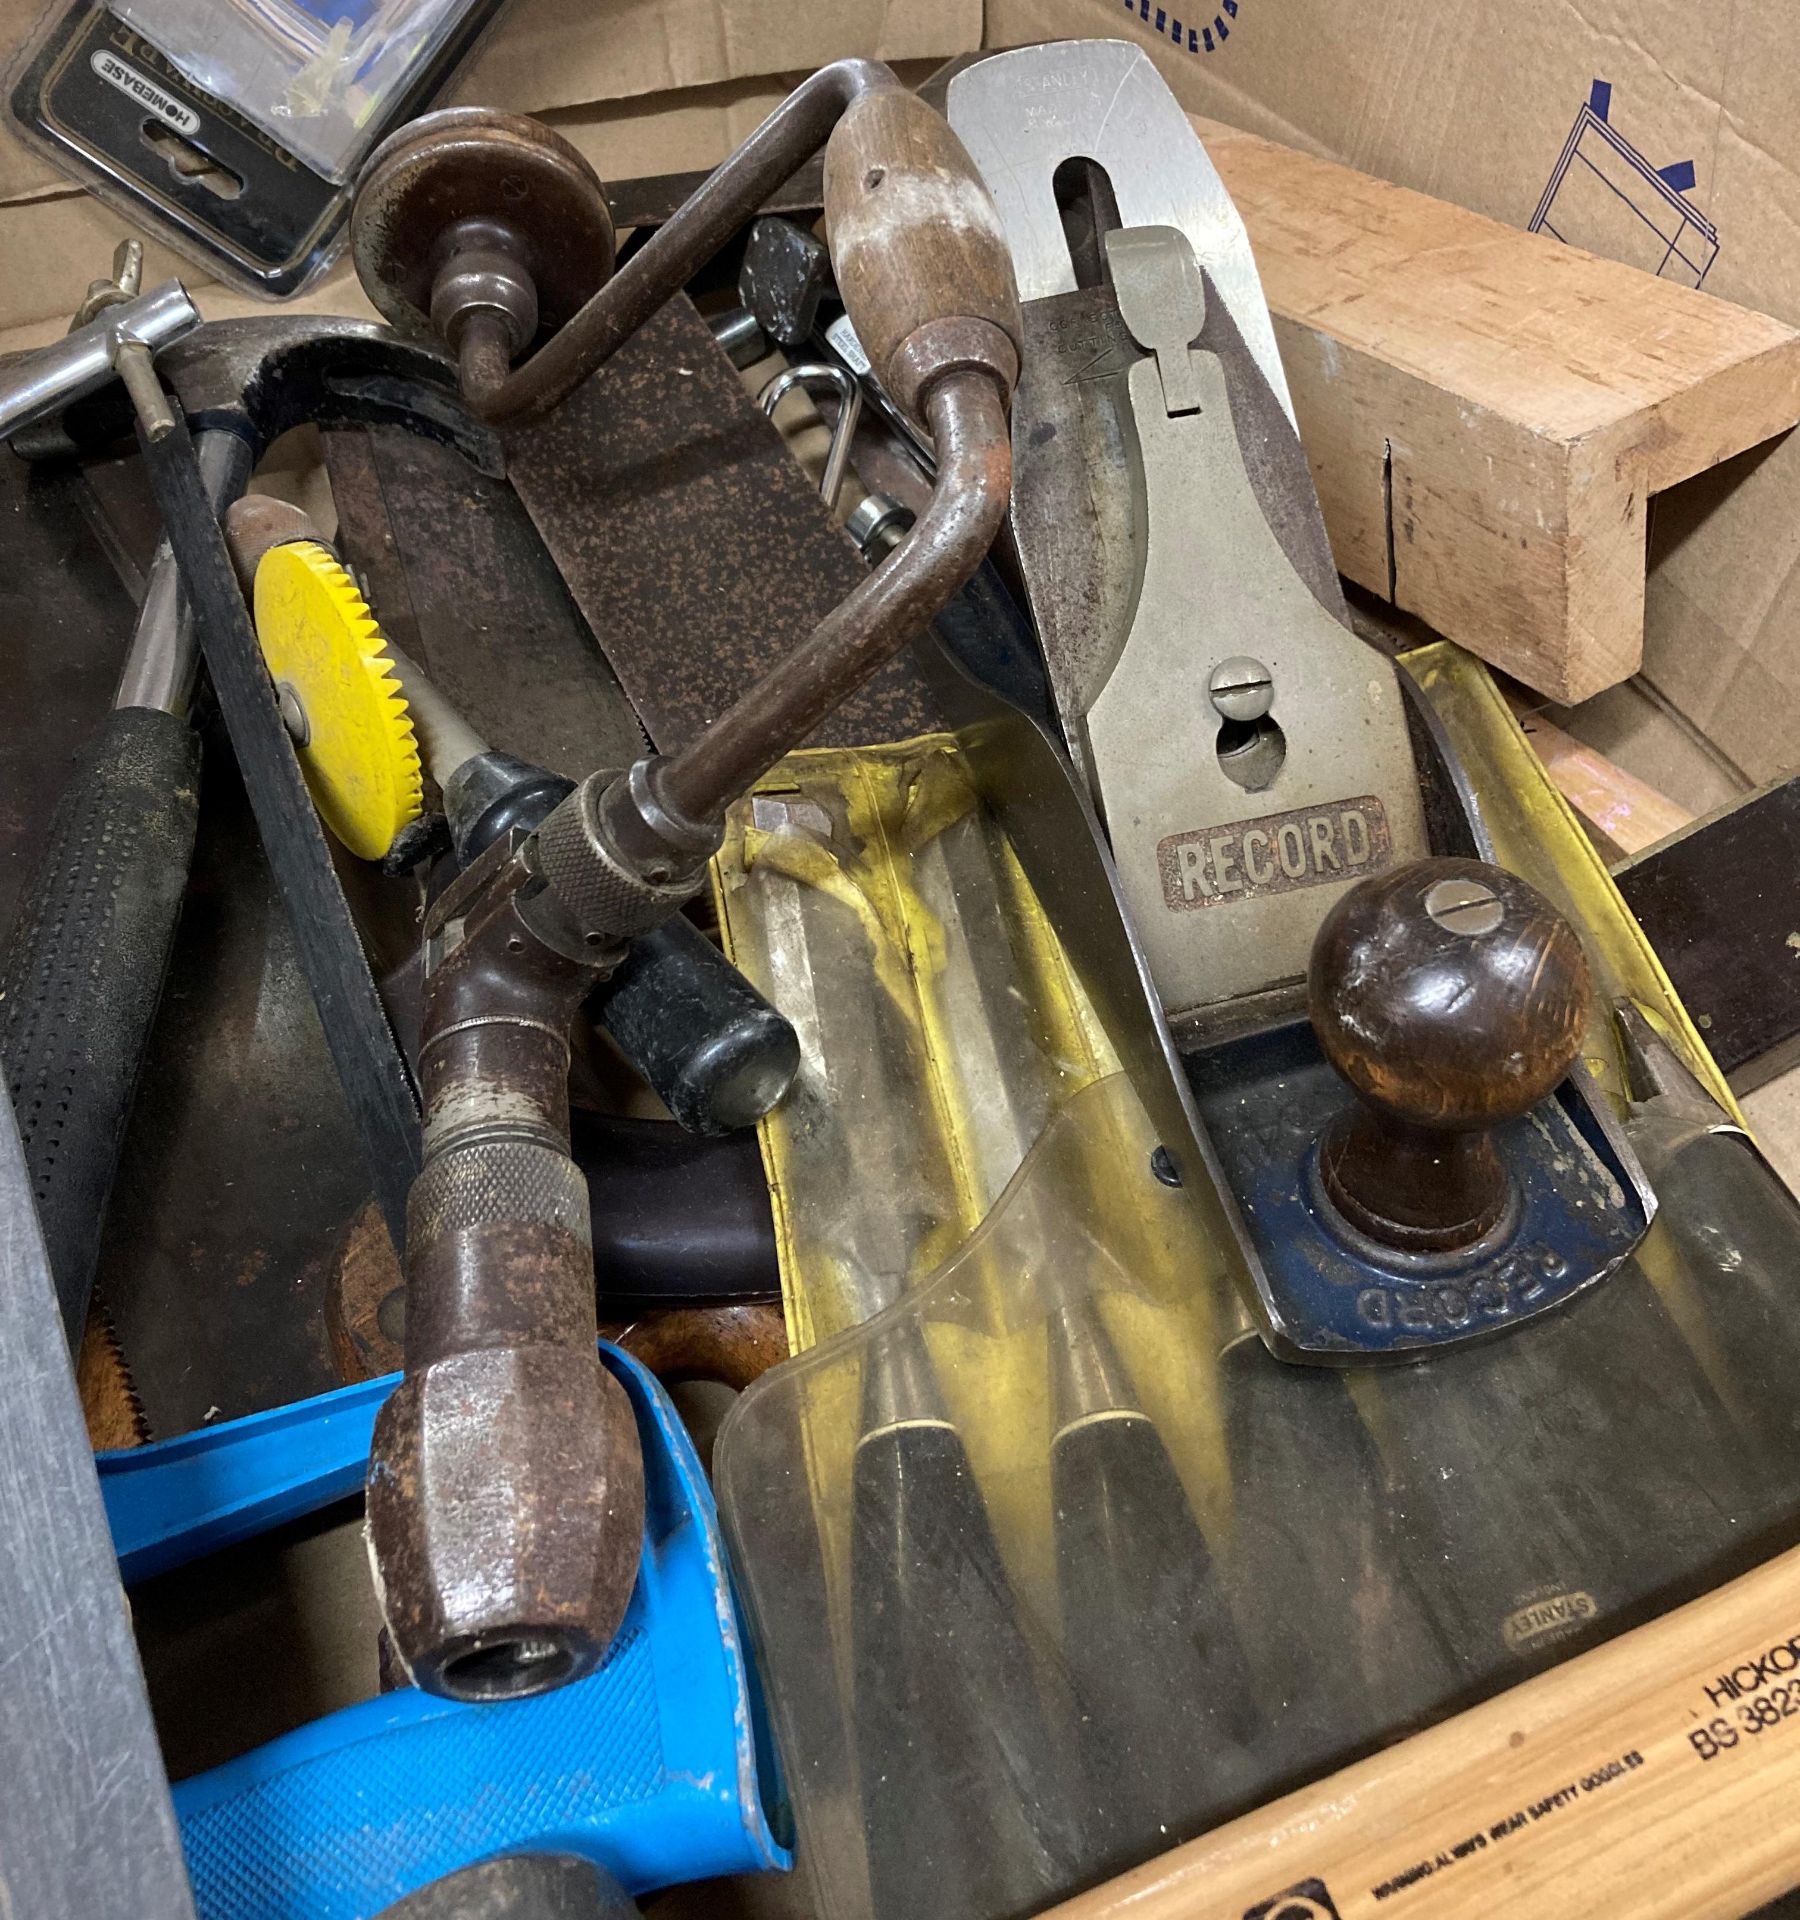 Contents to box - assorted hand tools including Record No 4½ plane, bit & brace, chisels, hammers, - Image 2 of 2